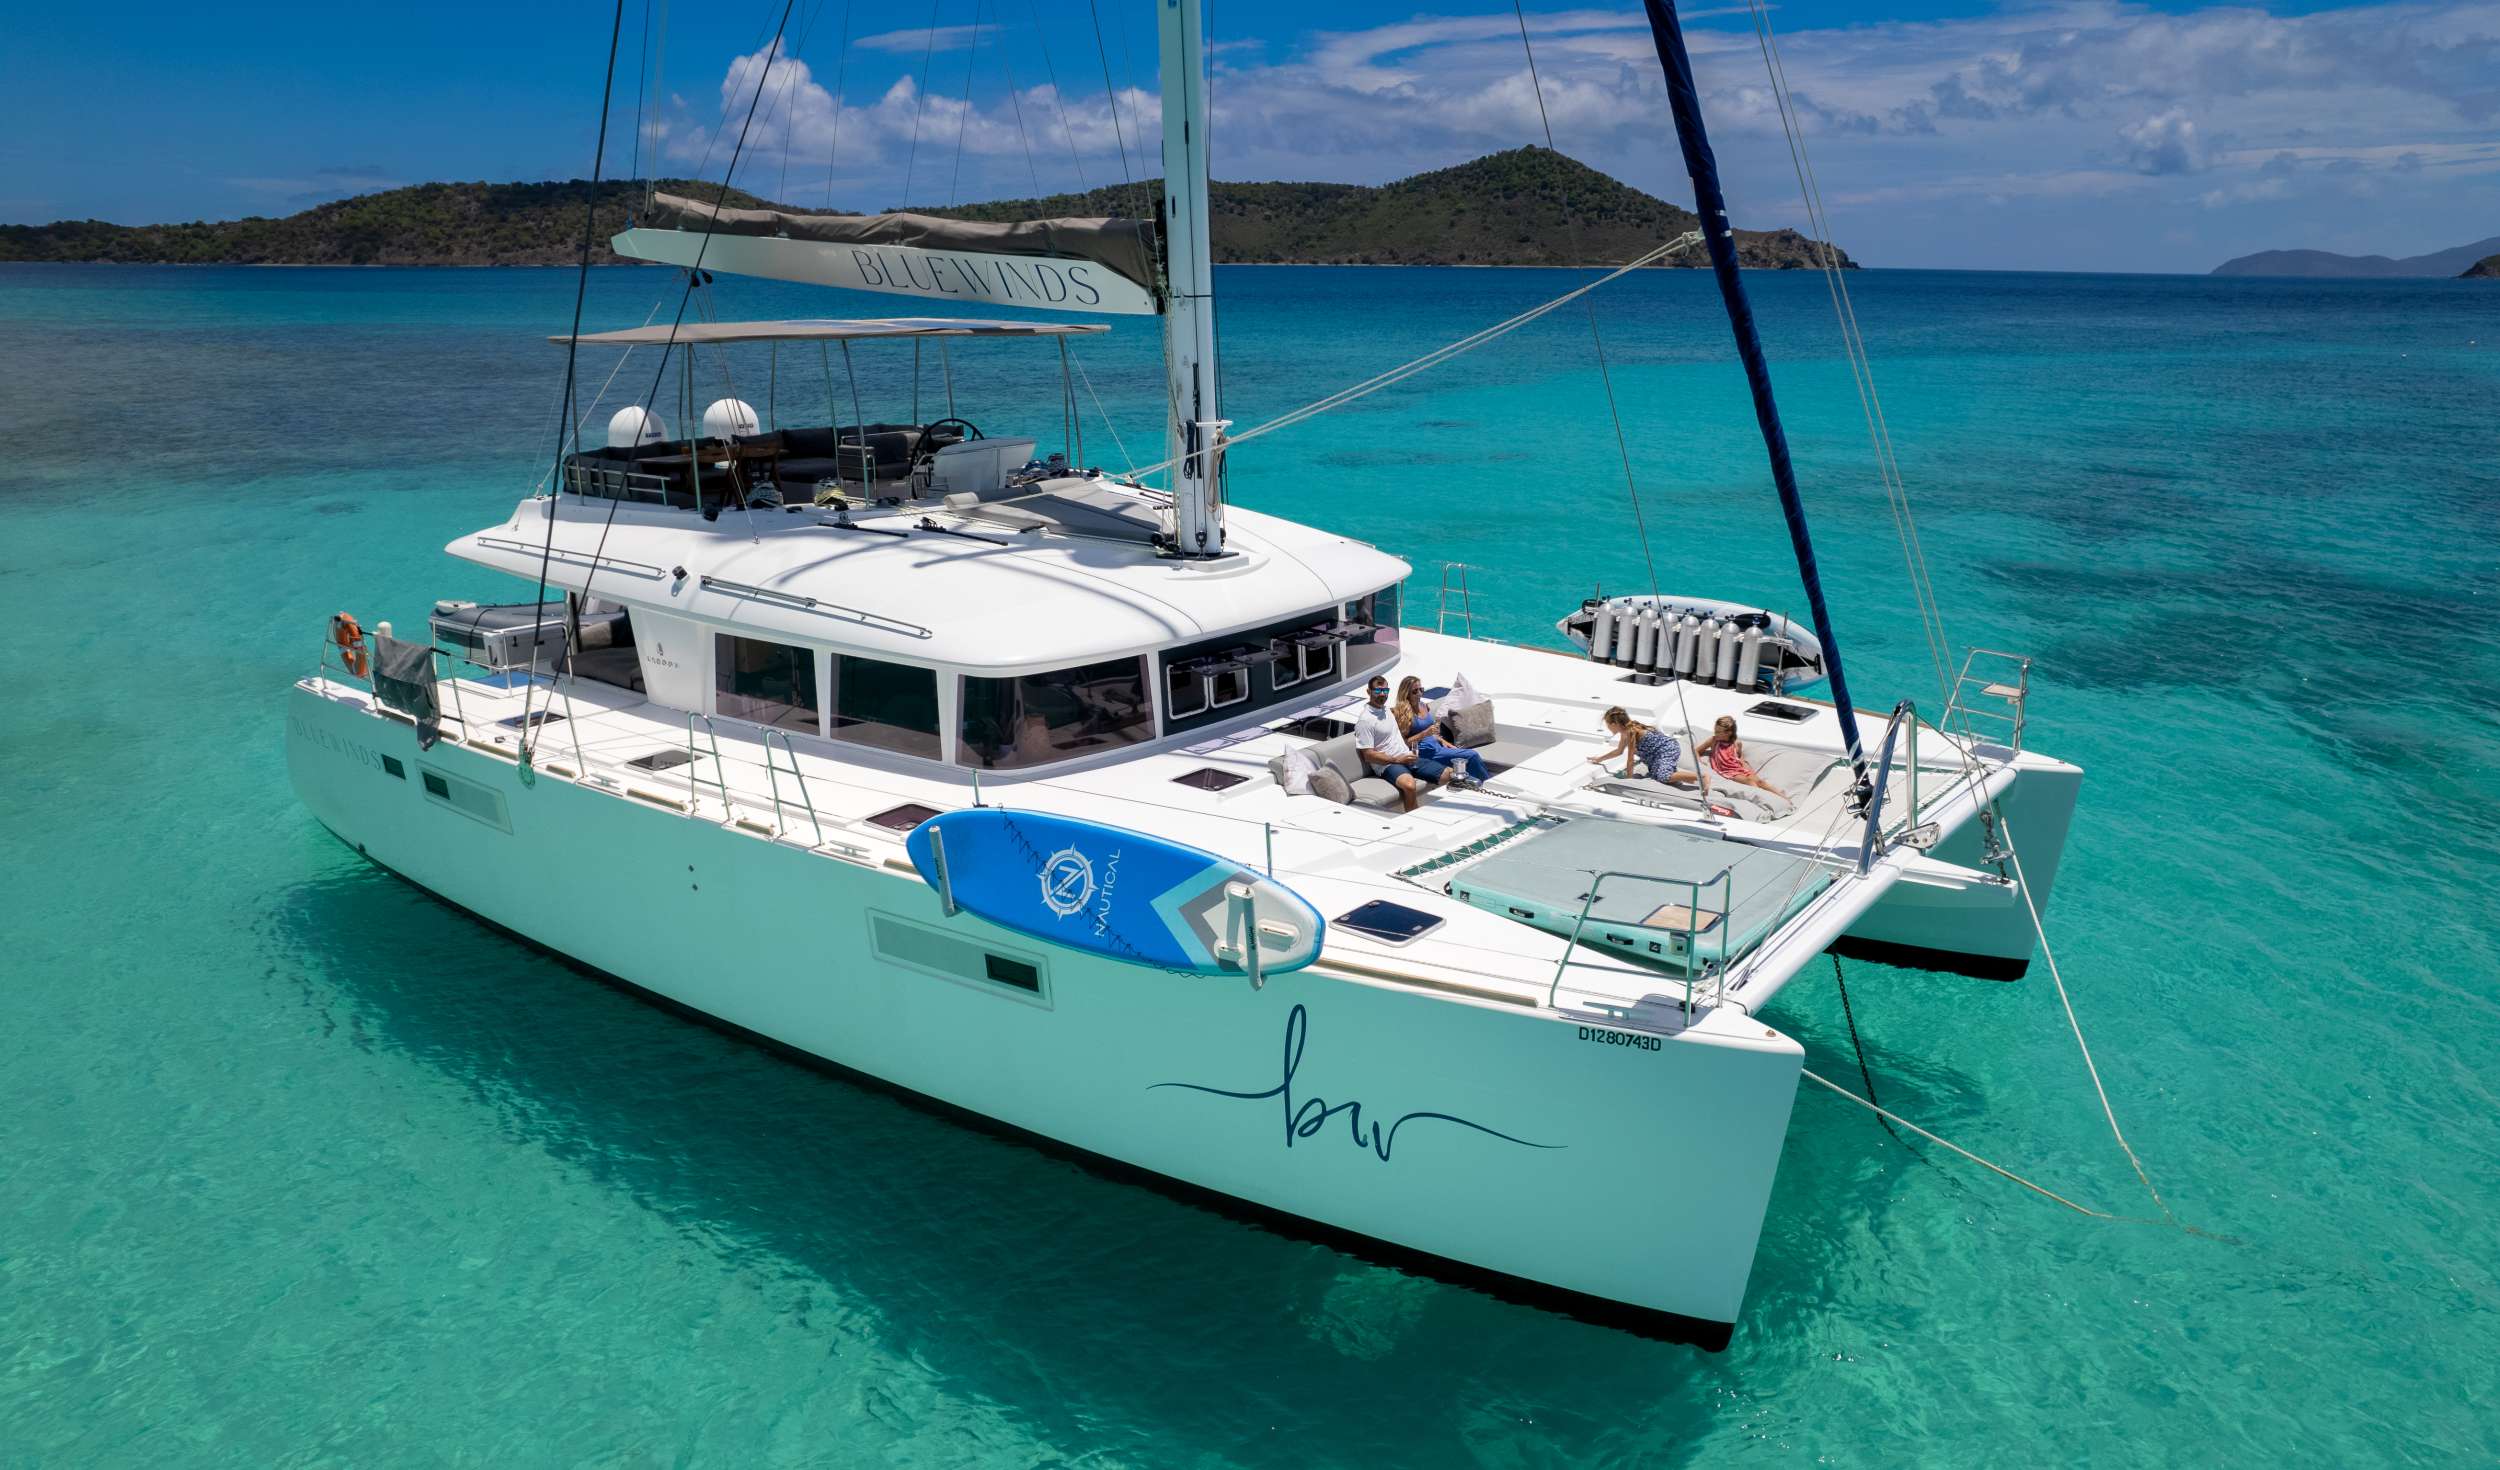 BLUEWINDS Yacht Charter - Ritzy Charters